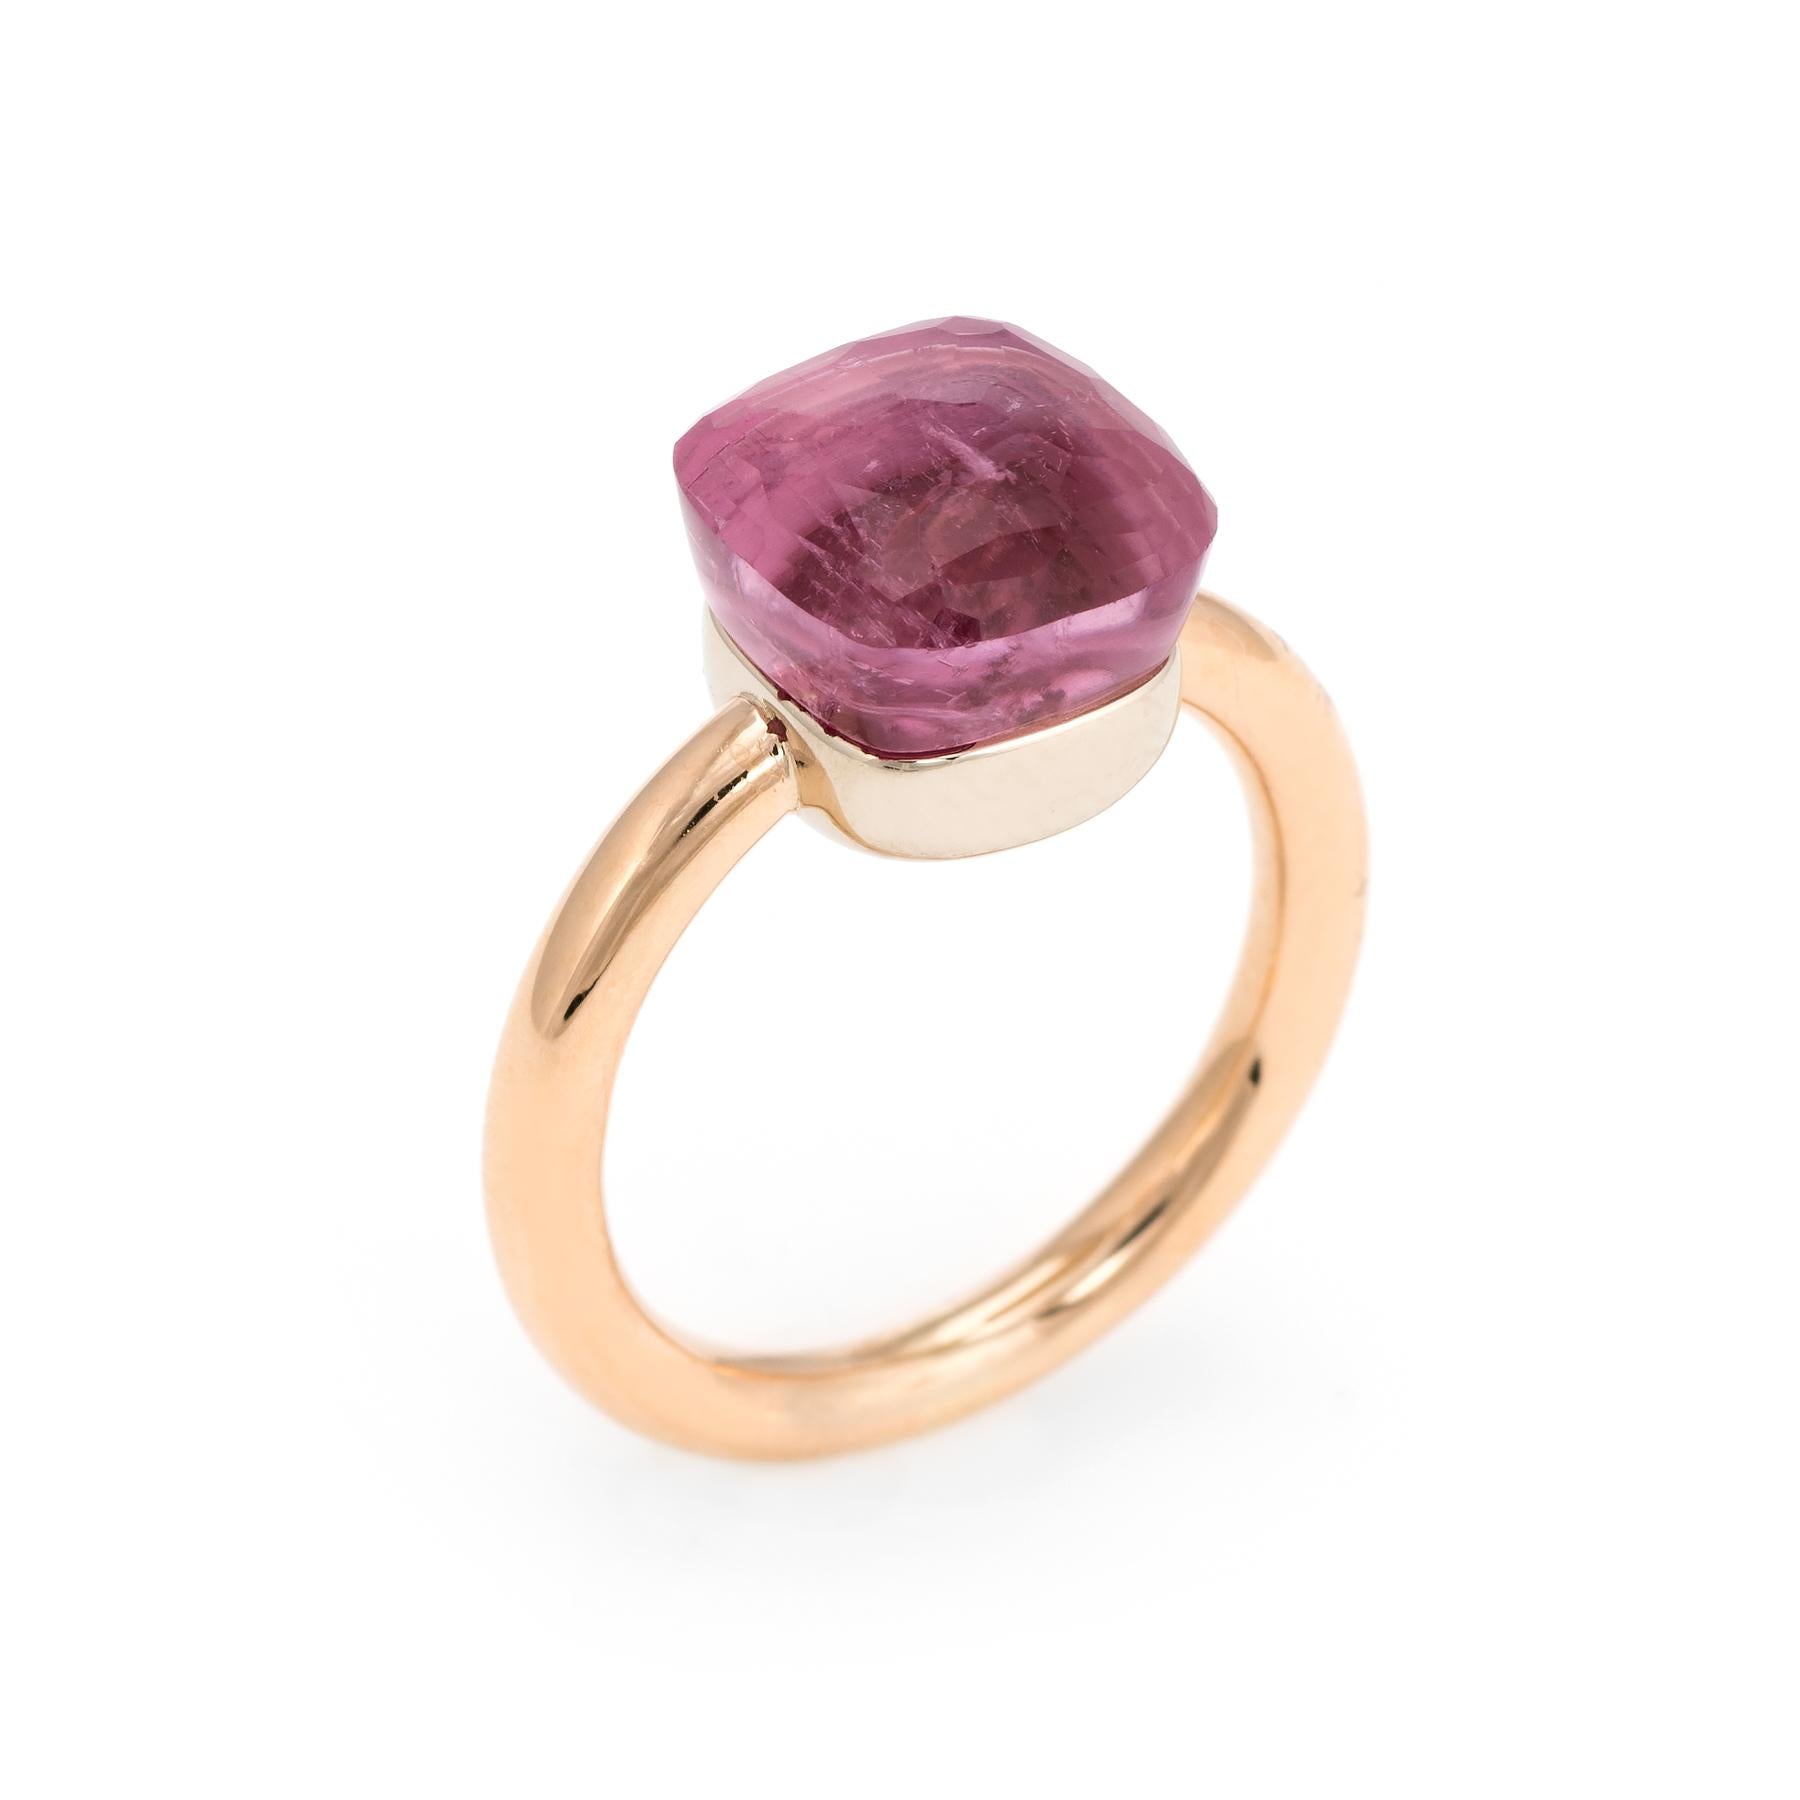 Finely detailed estate Pomellato Nudo ring, crafted in 18 karat yellow gold. 

Faceted pink tourmaline measures 10mm x 10mm (estimated at 5 carats). The pink tourmaline is in excellent condition and free of cracks or chips. The tourmaline exhibits a